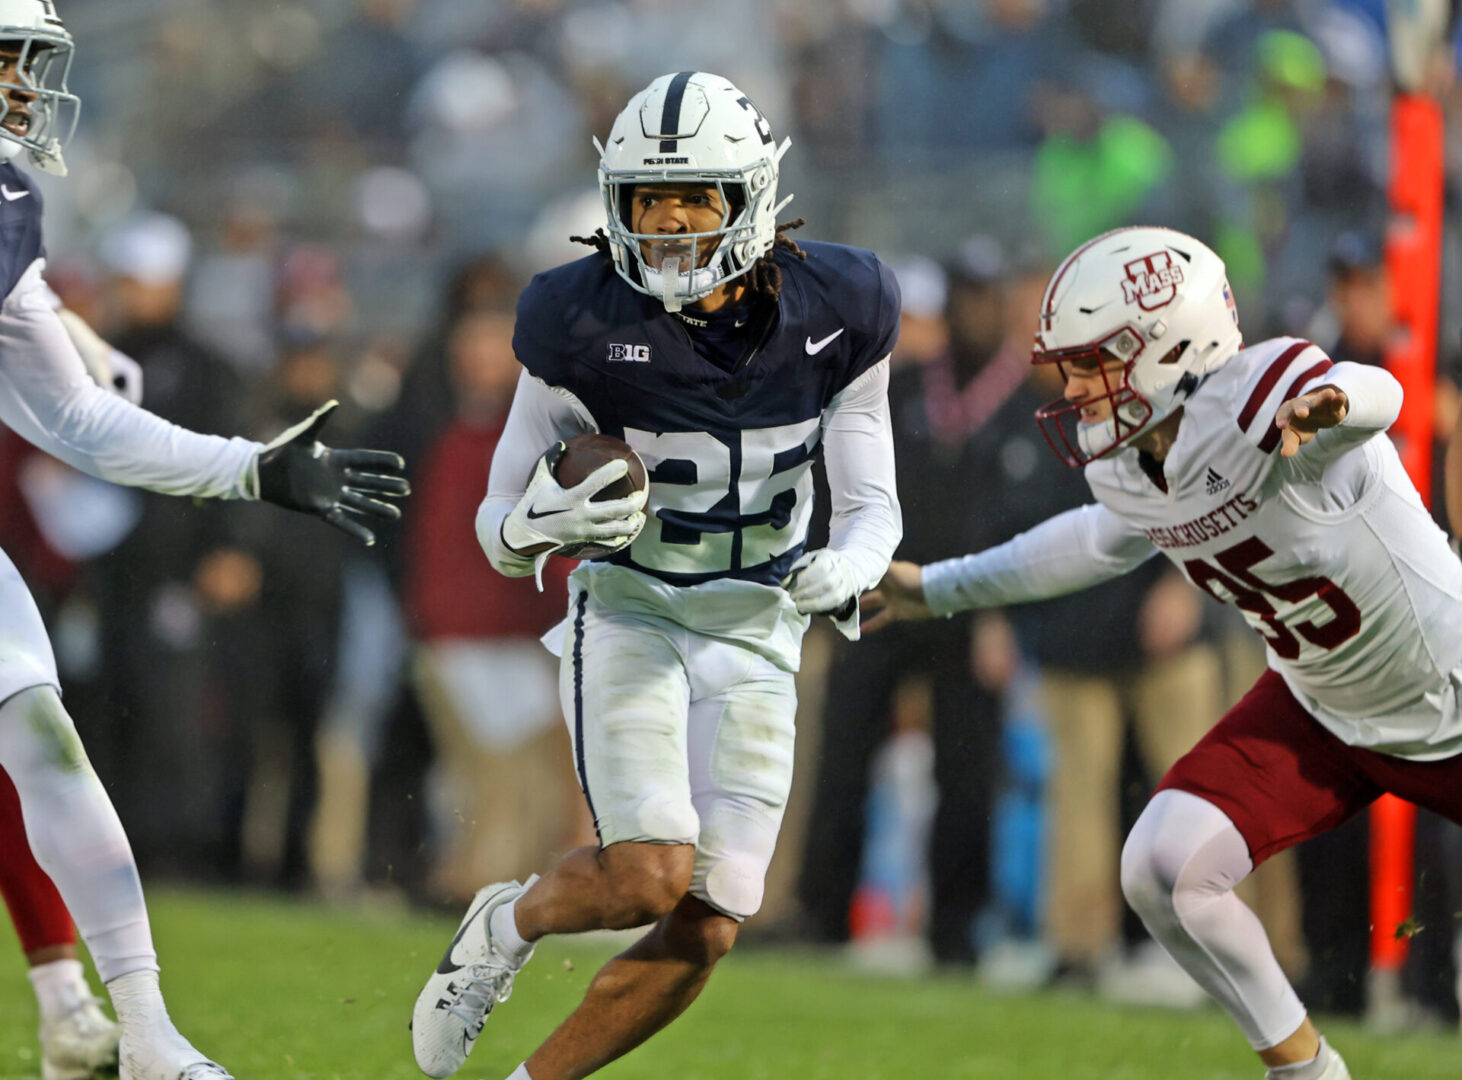 Penn State Football: Blue-White to Provide a Glimpse into Punt Return Battle